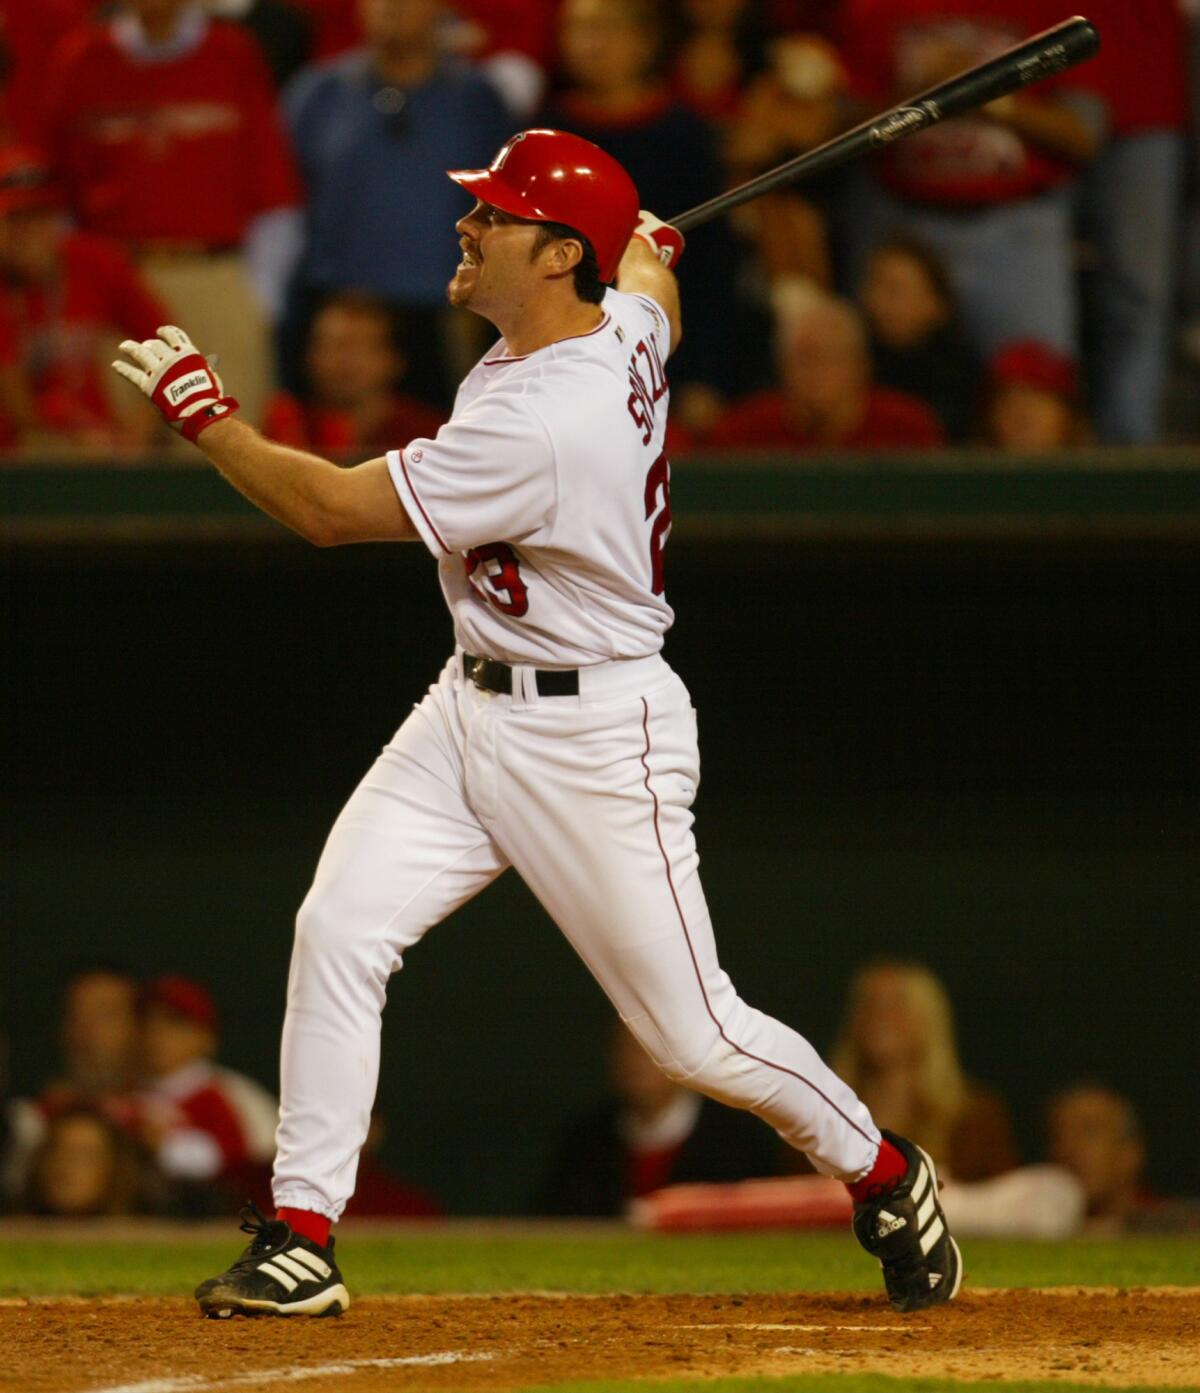 Scott Spiezio hits a three-run home run during the seventh inning in Game 6 of the 2002 World Series.